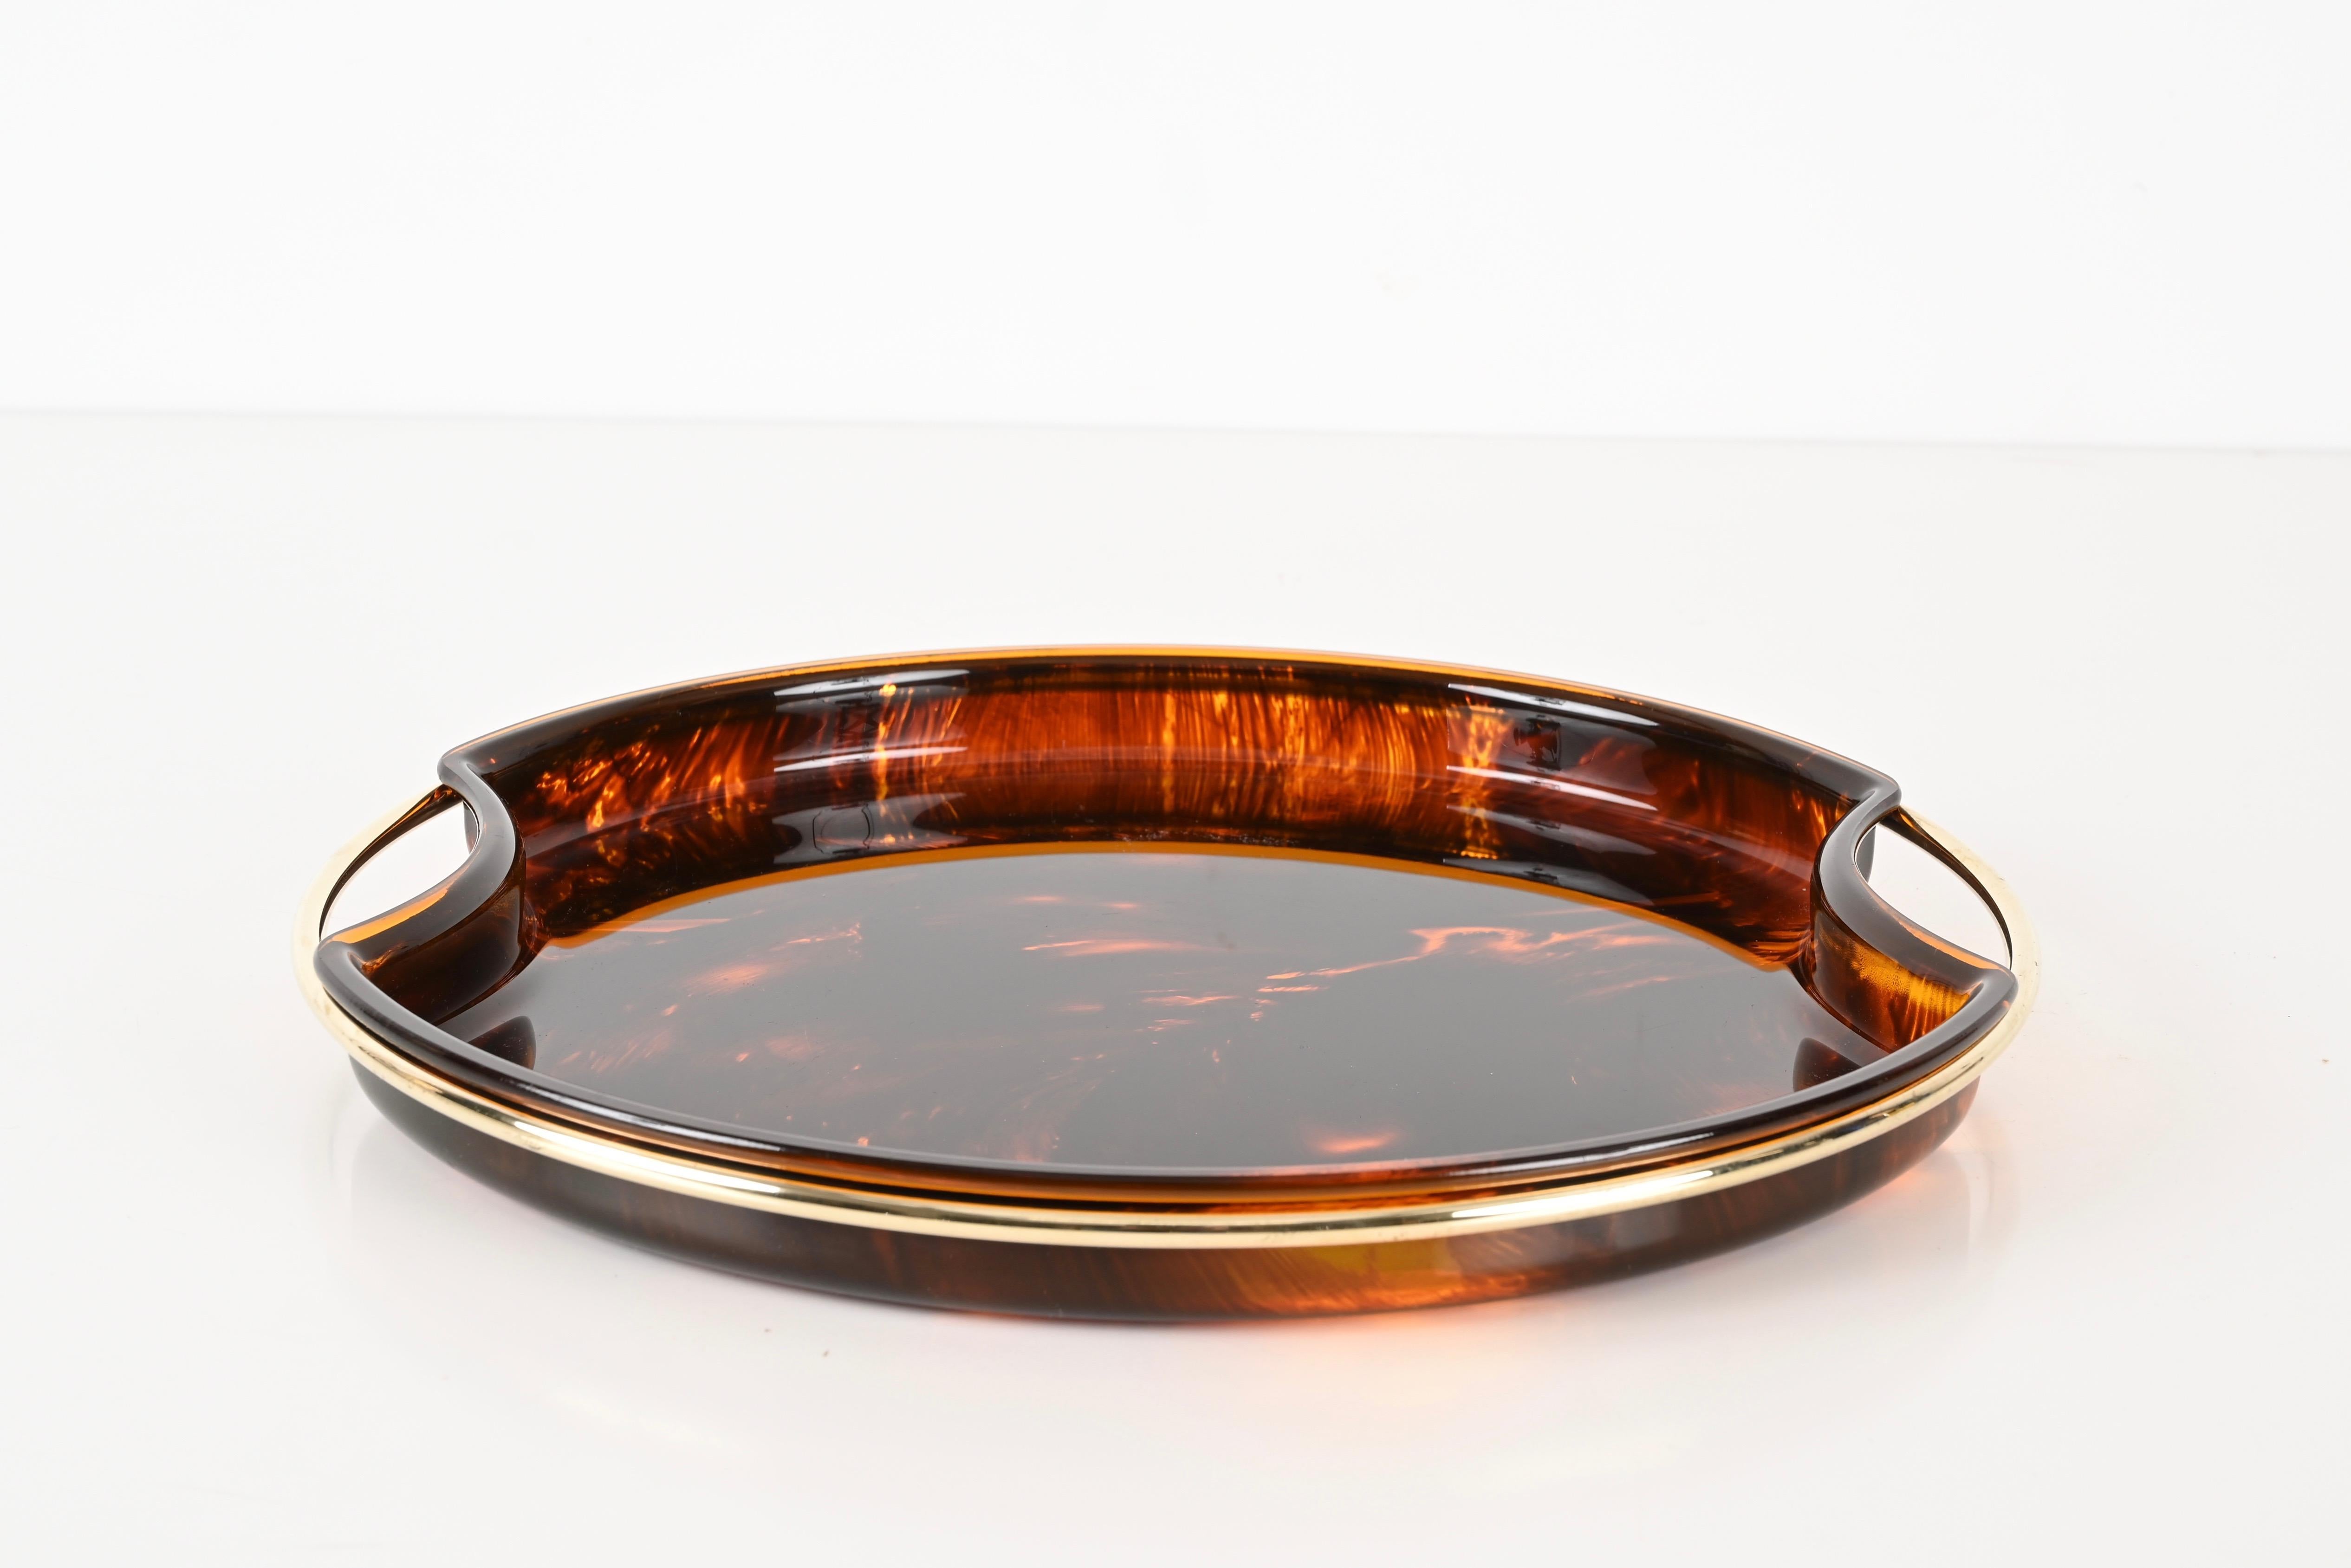 Italian Mid-Century Tortoiseshell Lucite and Brass Serving Tray by Guzzini, Italy 1970s For Sale